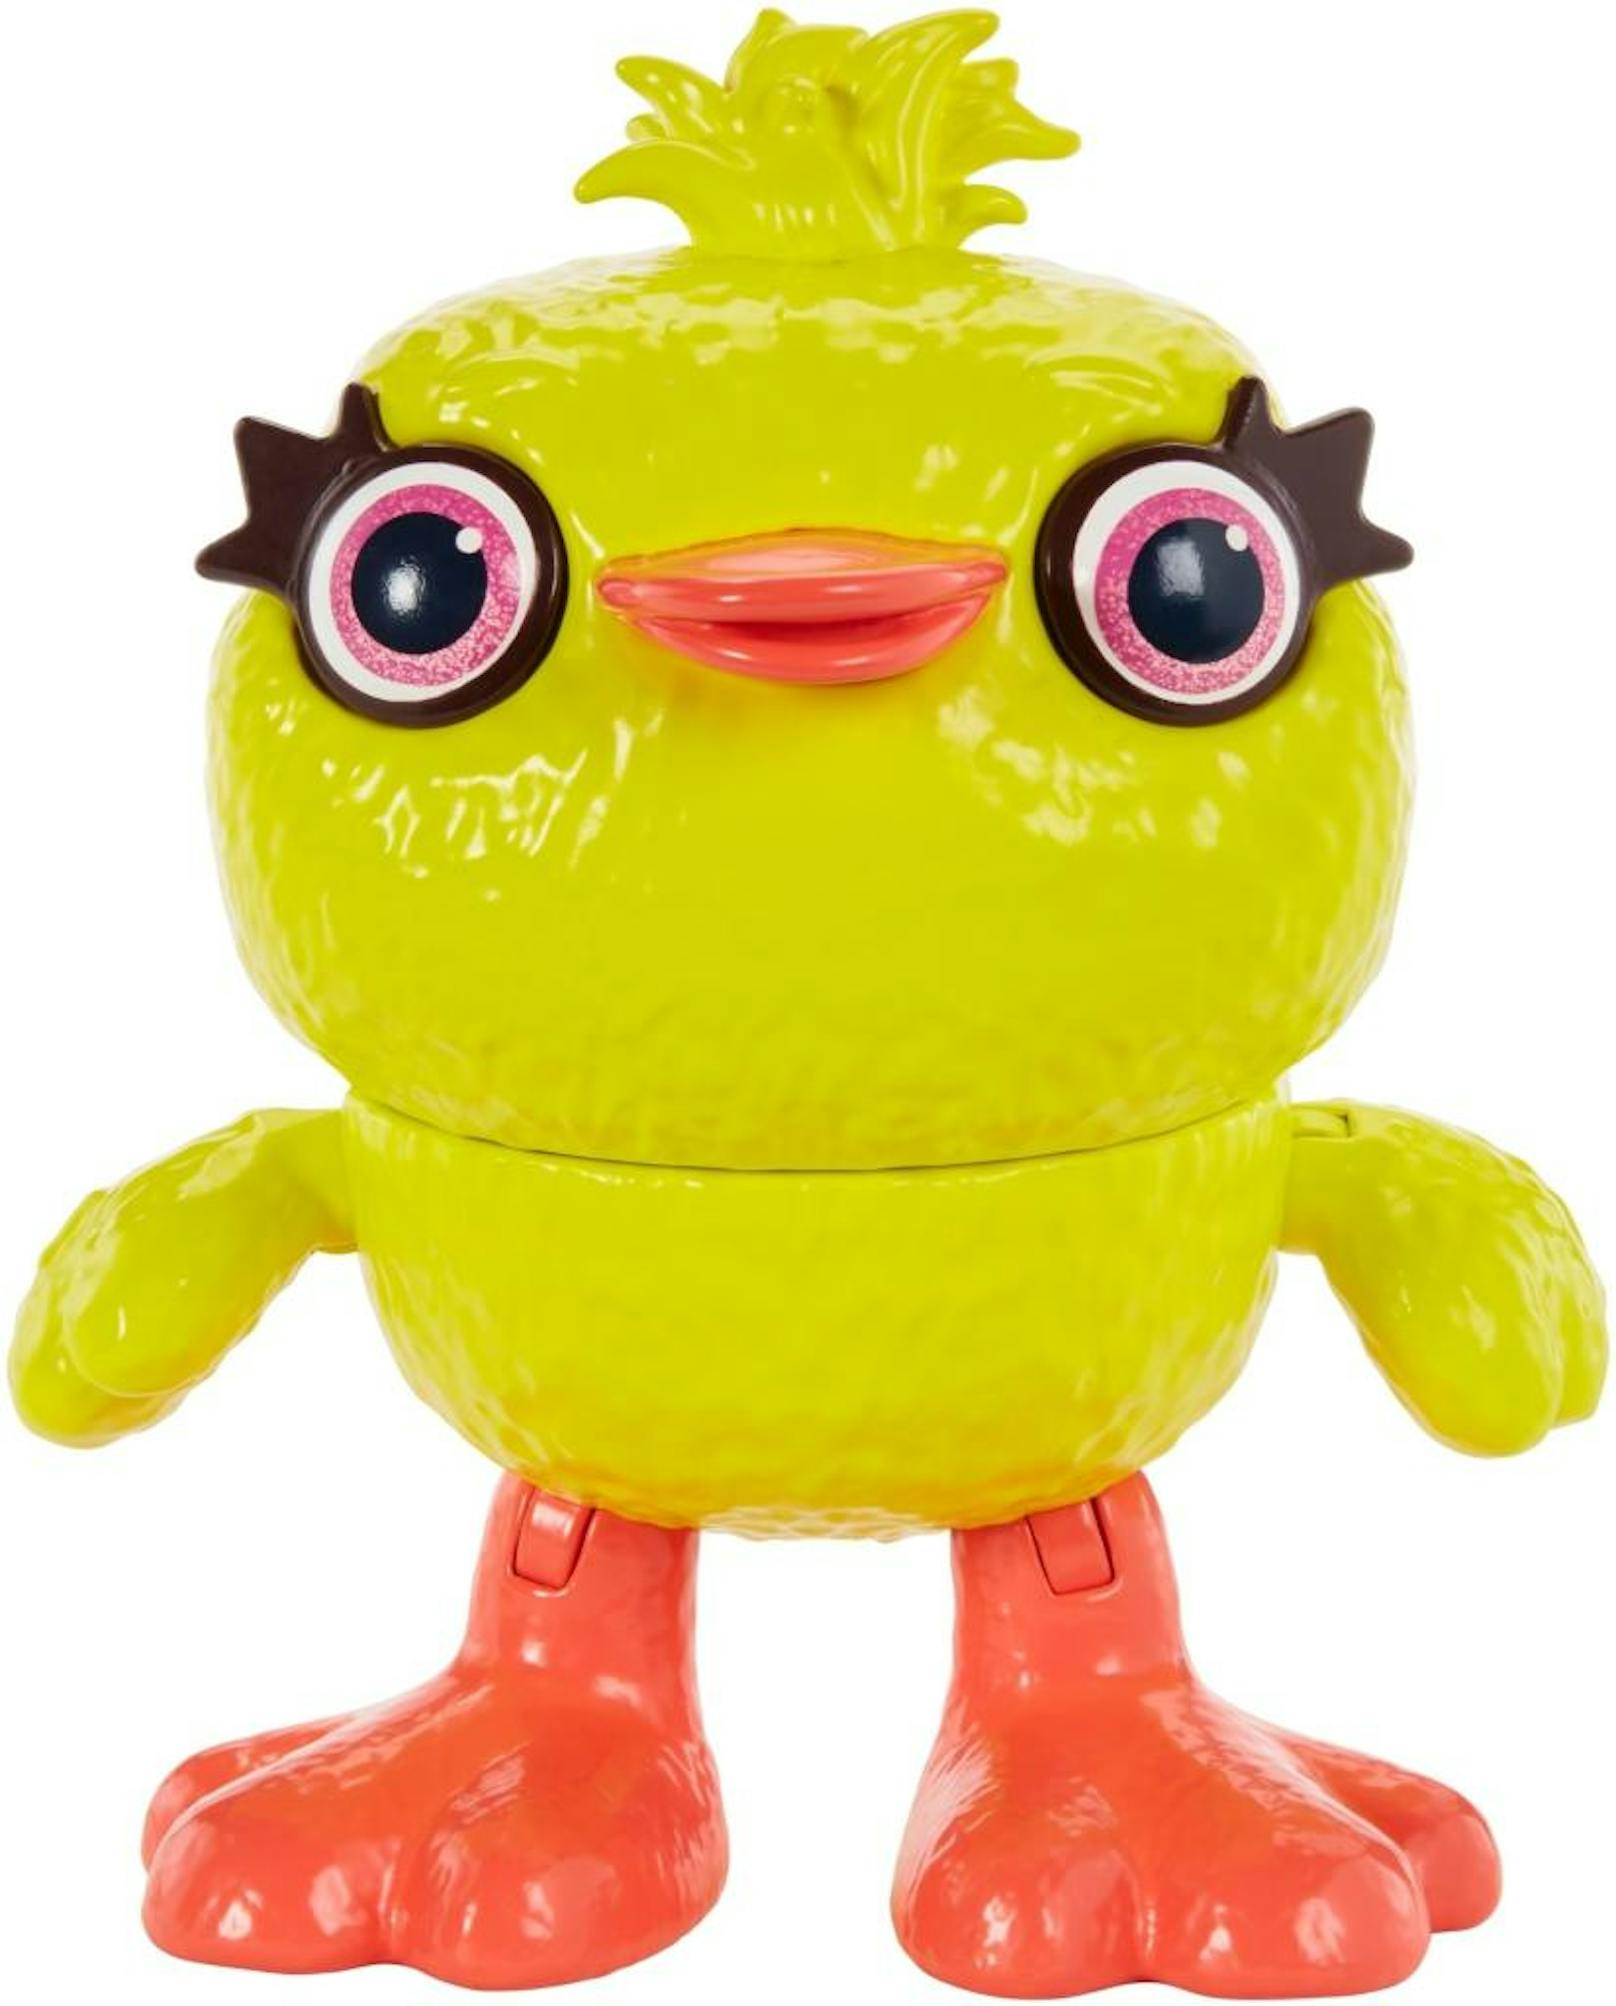 TOY STORY-Figur "Ducky"